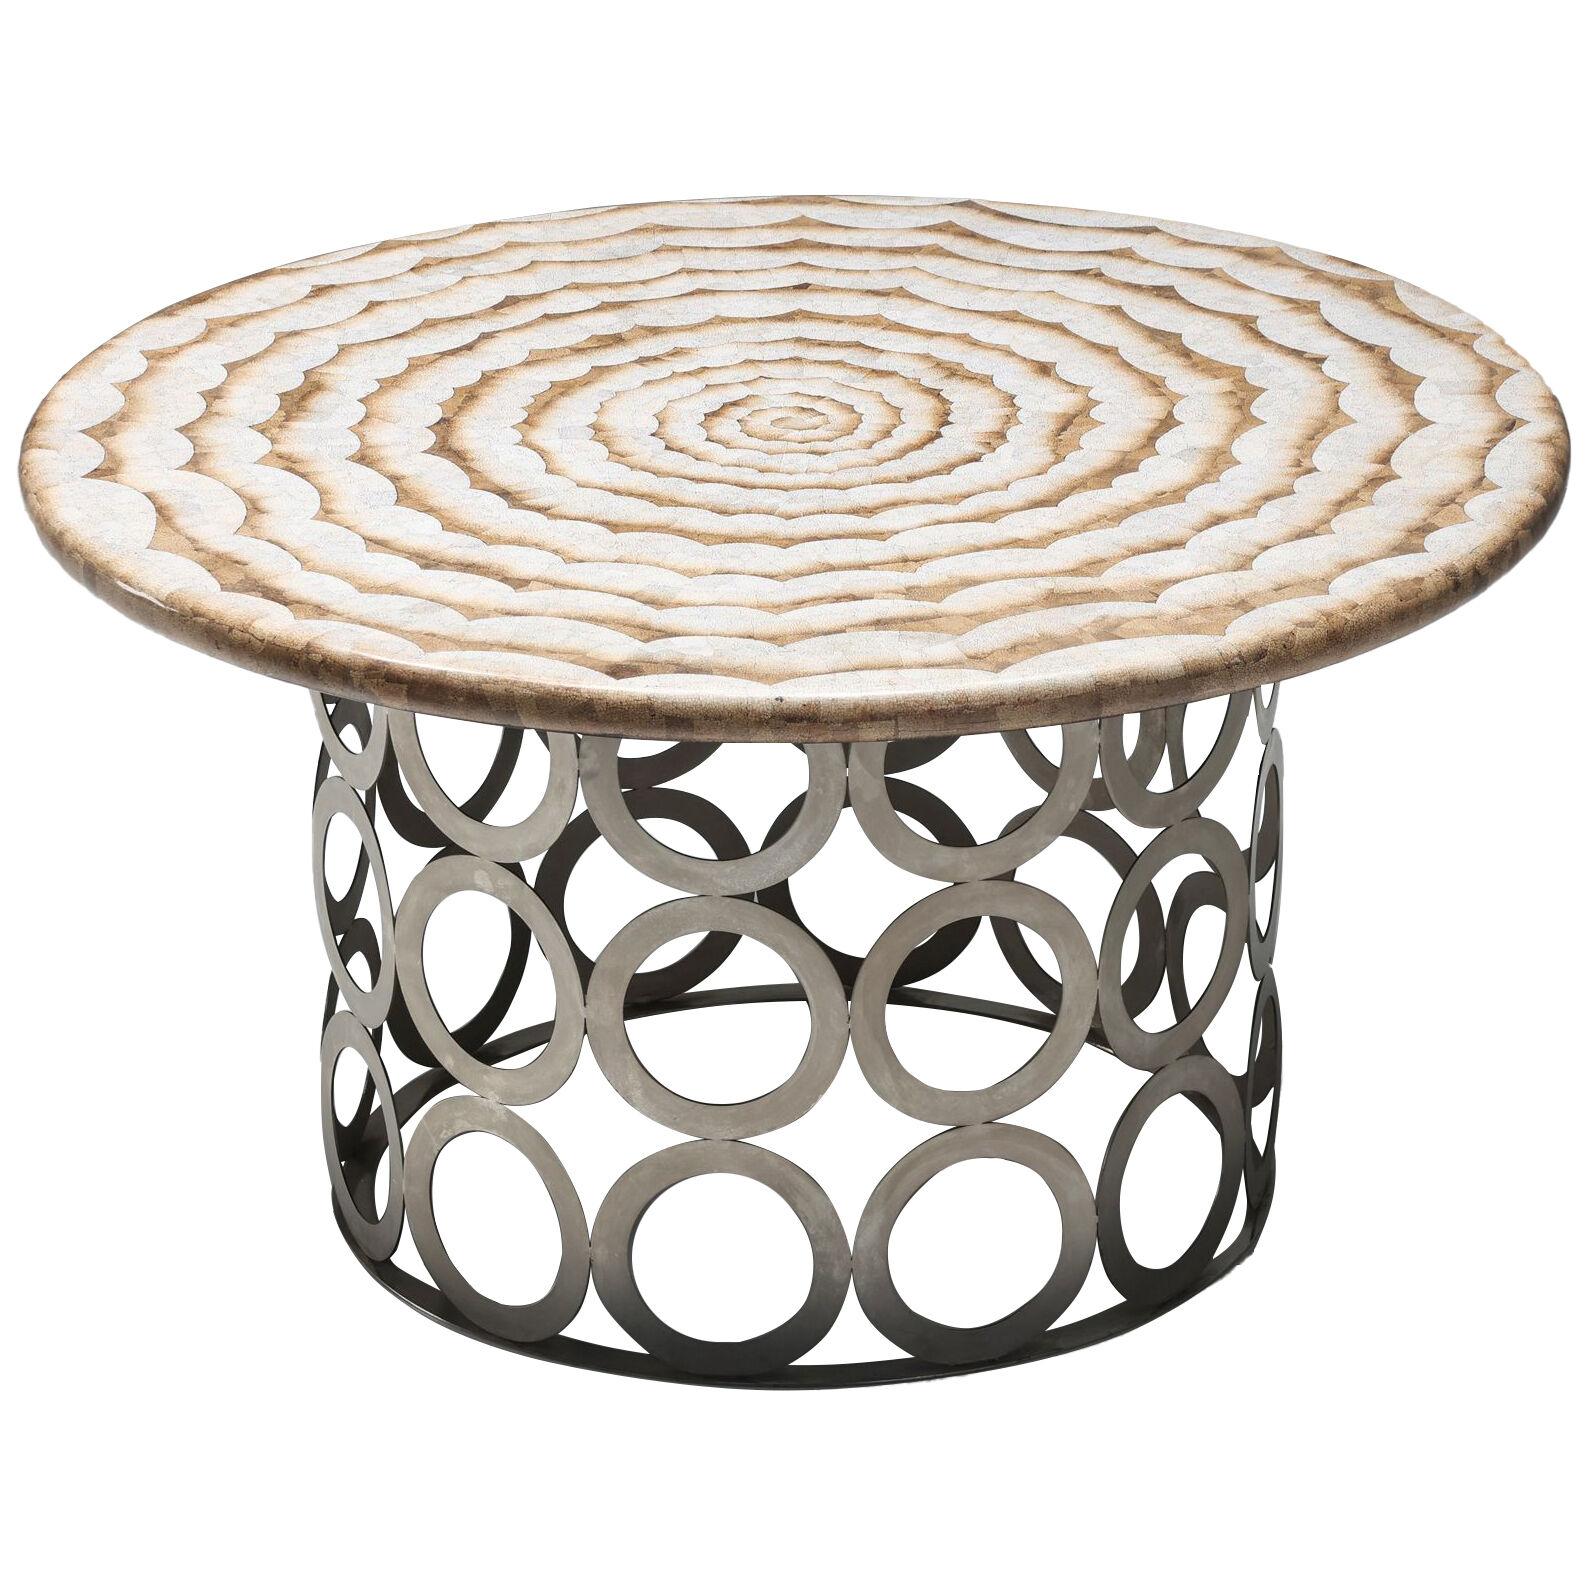 Eclectic Round Dining Table by Anacleto Spazzapan - 2000's